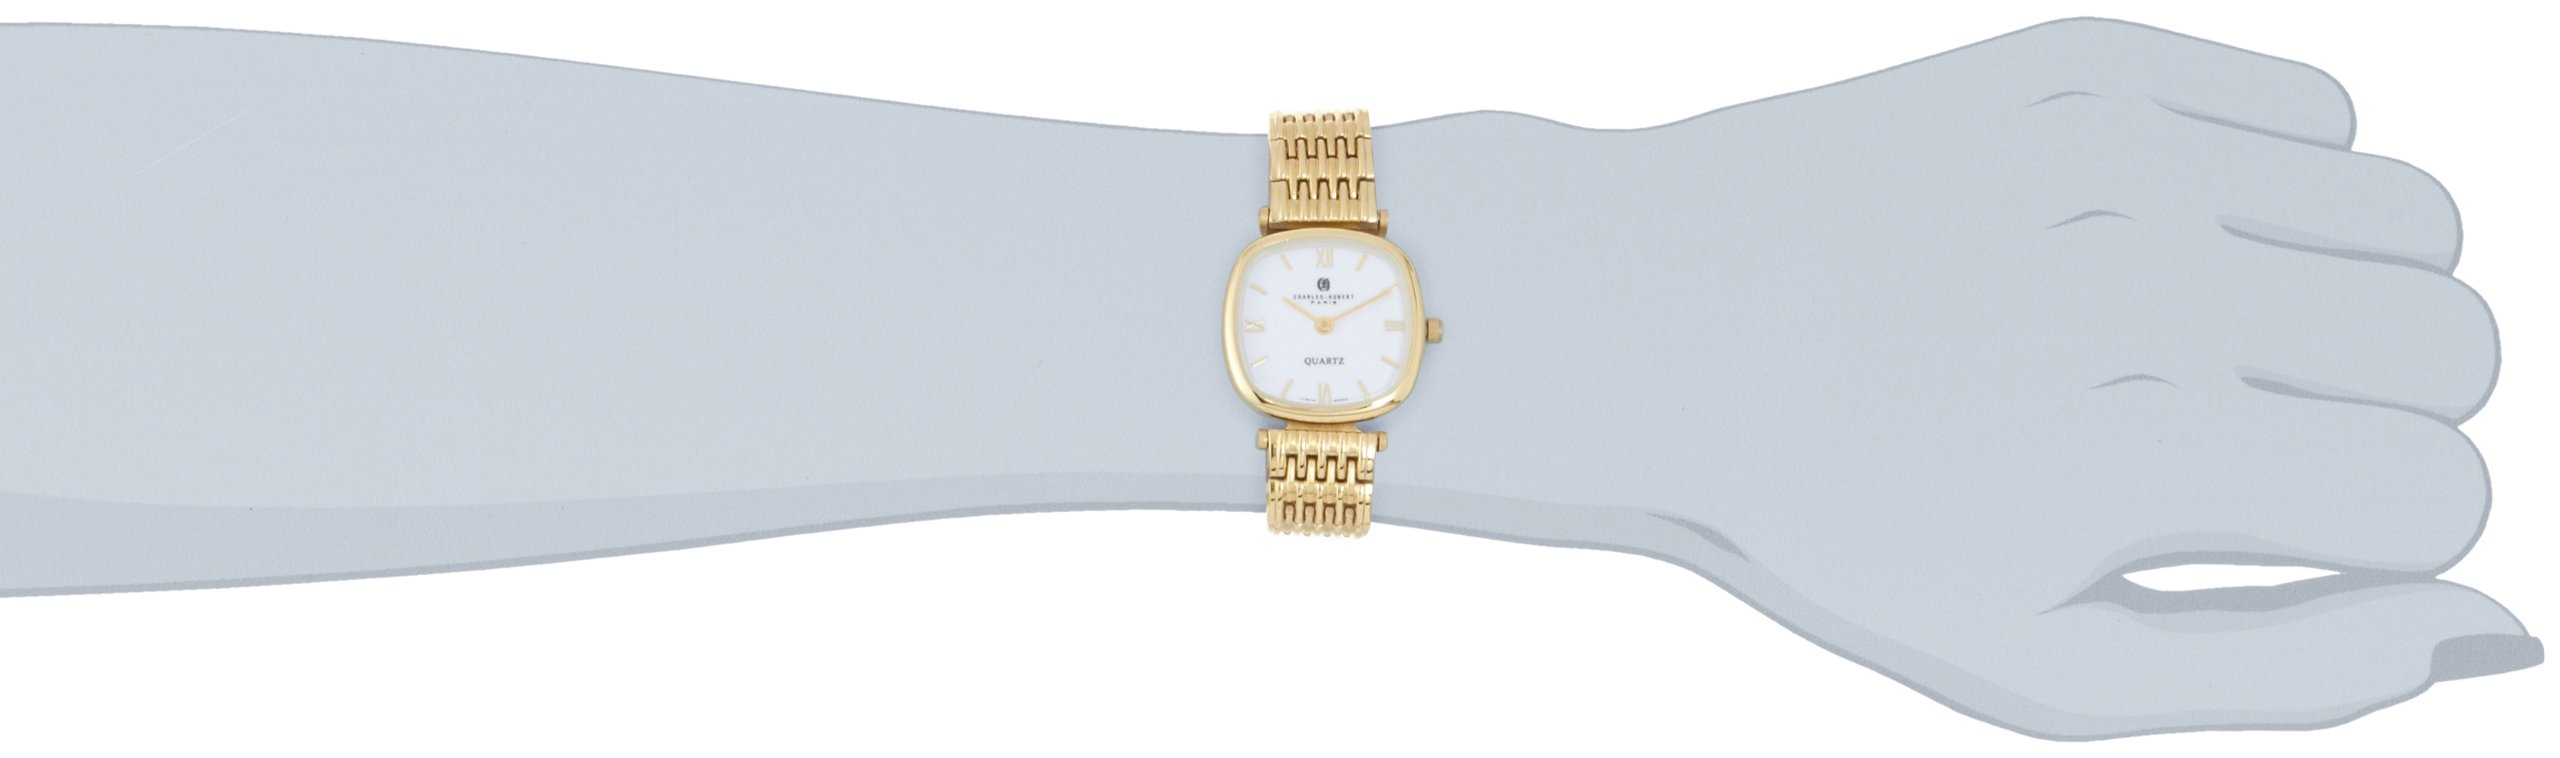 Charles-Hubert, Paris Women's 6796 Premium Collection Gold-Plated Stainless Steel Watch